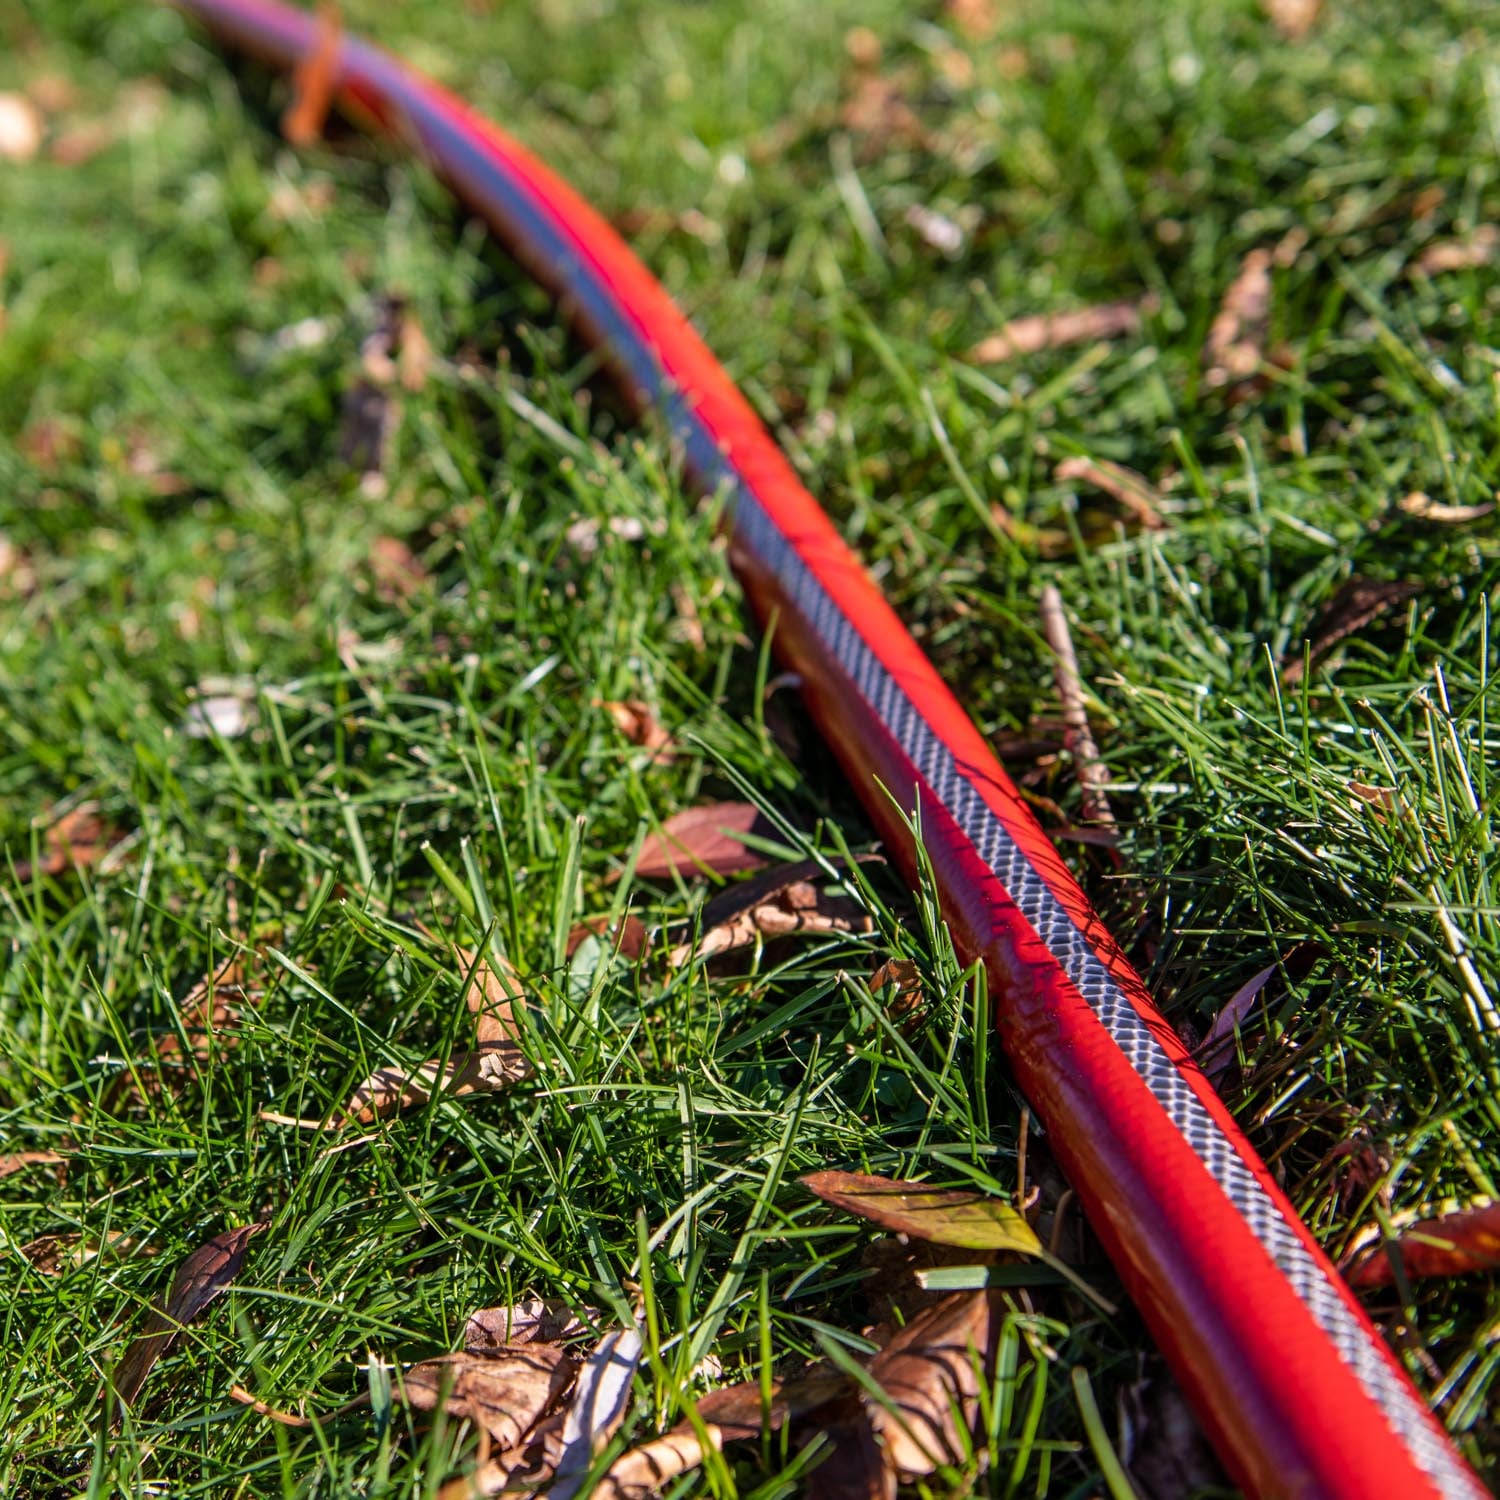 Neverkink XP Teknor Apex 3/4-in x 100-ft Contractor-Duty Kink Free Vinyl  Red Coiled Hose in the Garden Hoses department at